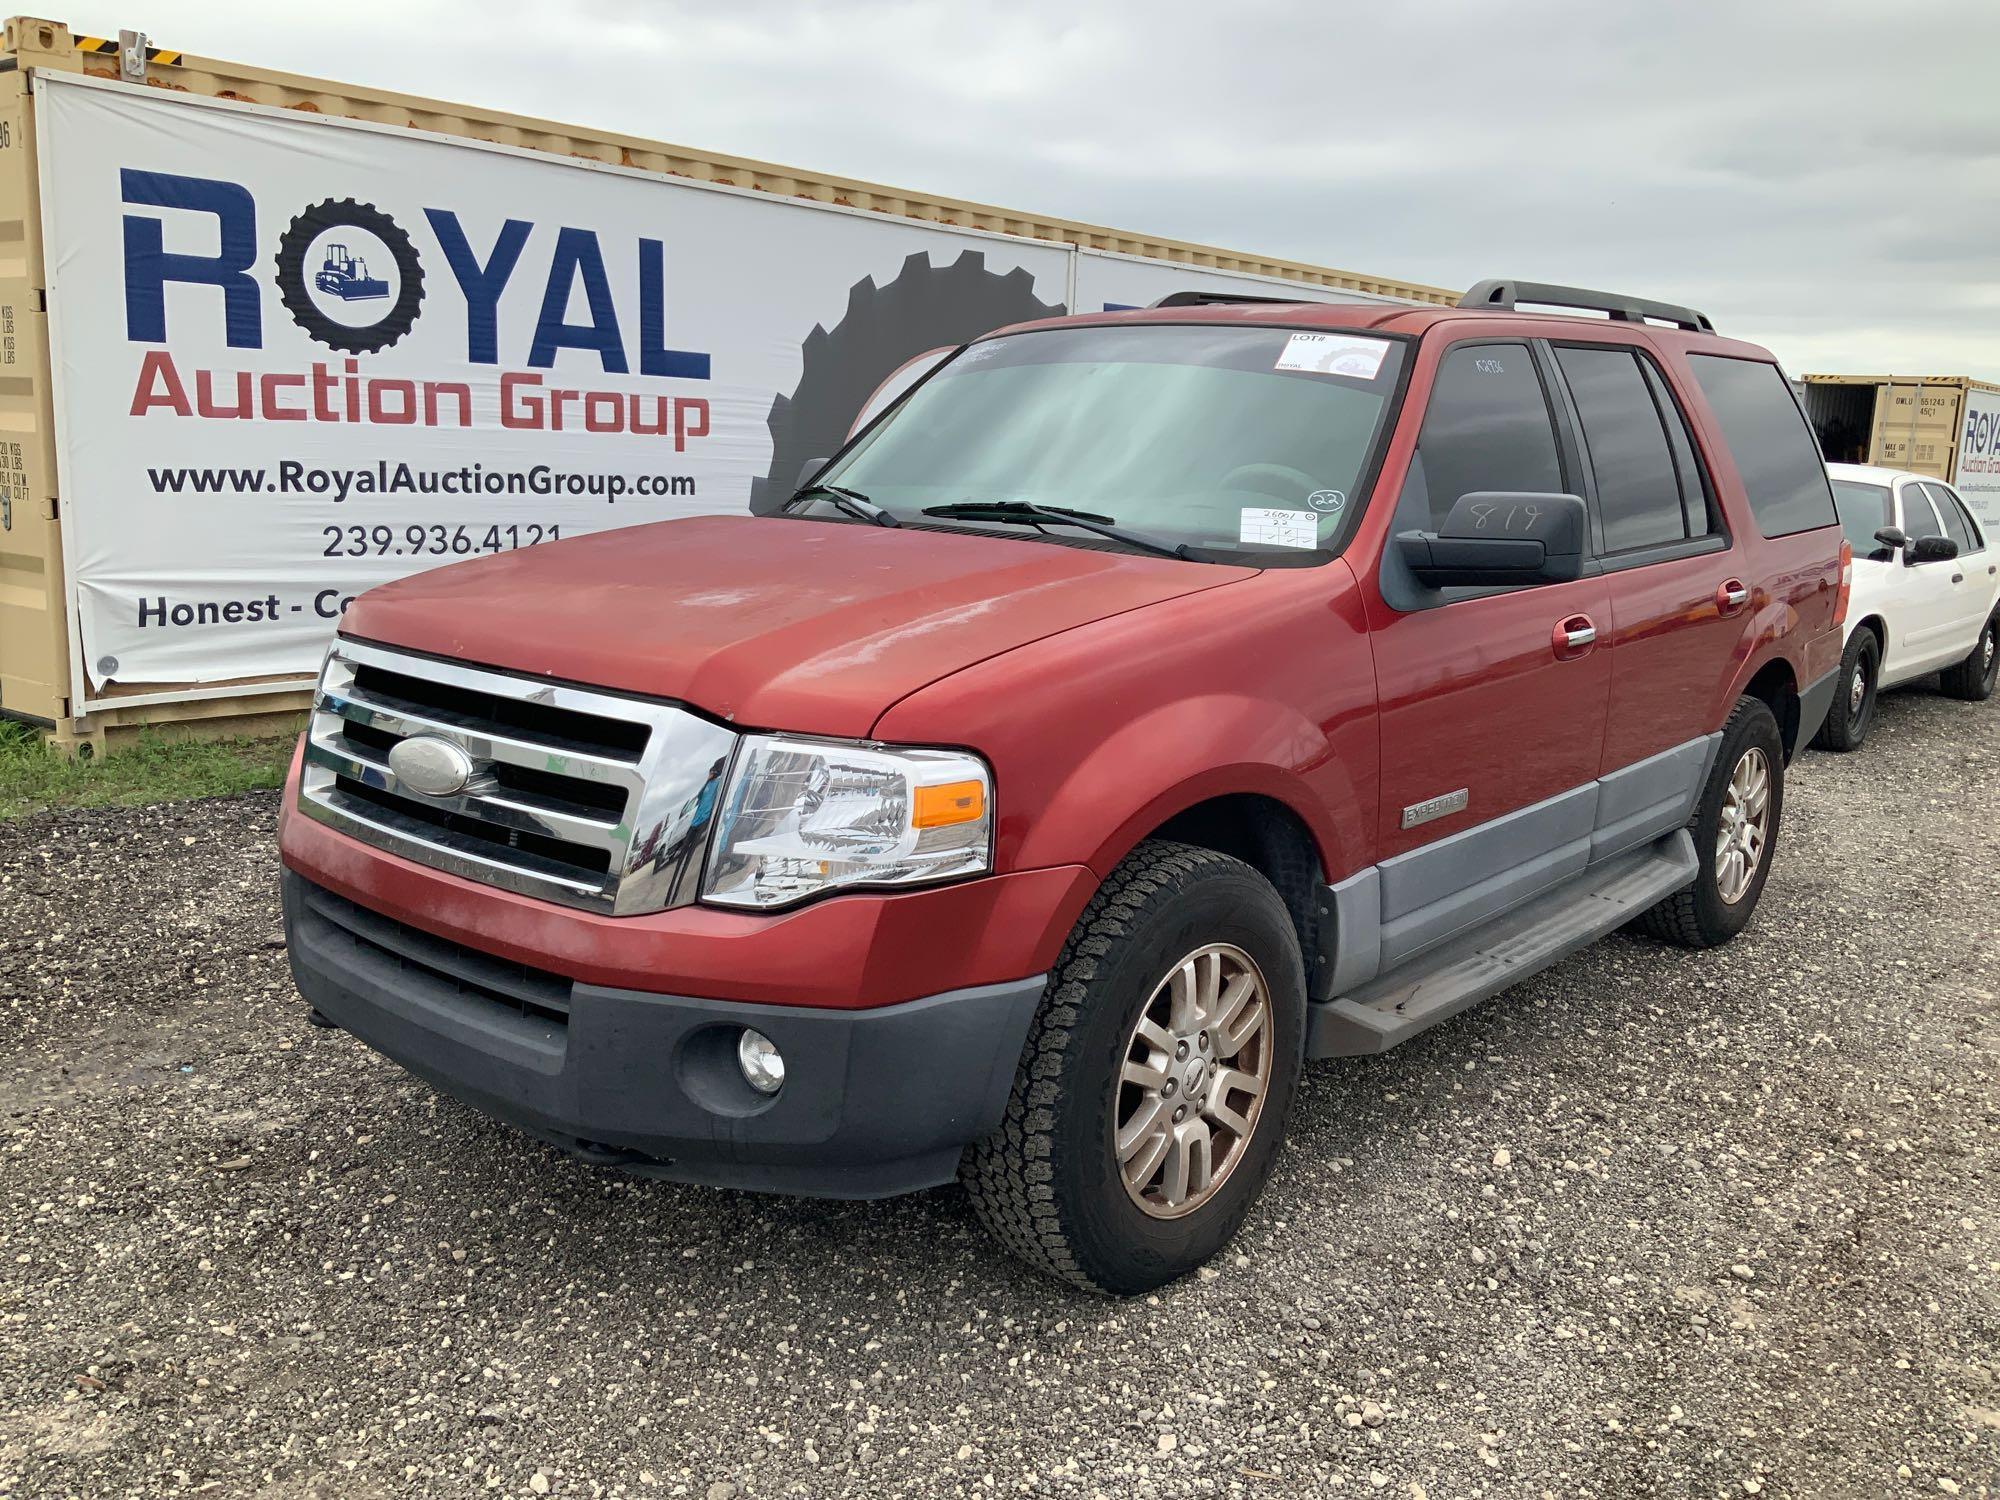 2007 Ford Expedition 4x4 Sport Utility Vehicle